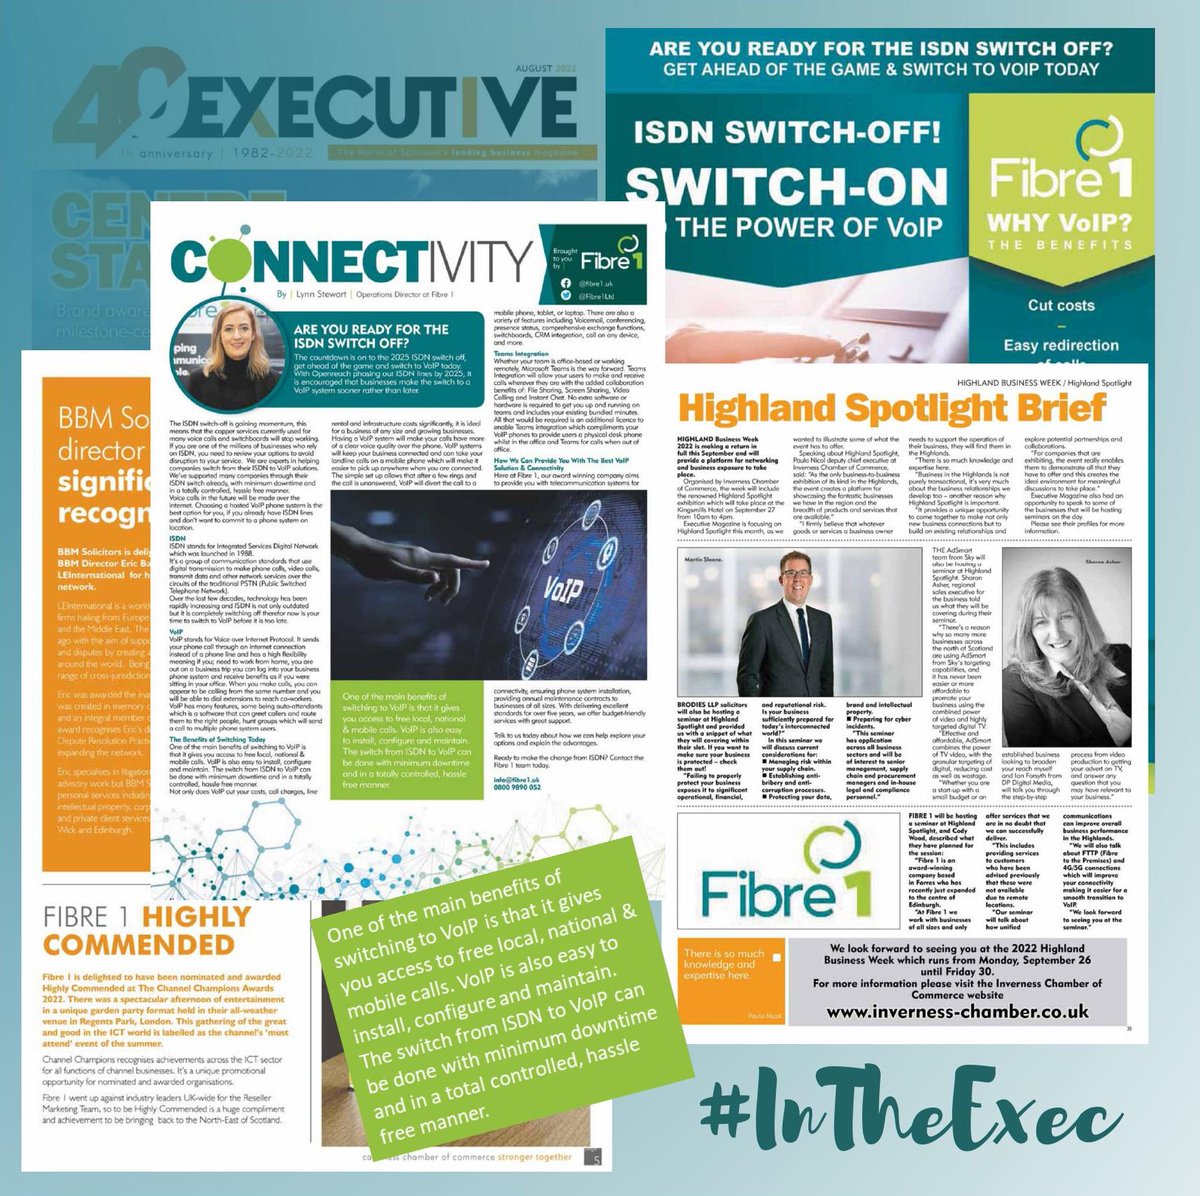 Fibre 1 Ltd | @executive_magazine ✨

Head over to our LinkedIn for more information ➡️linkedin.com/company/fibre-…

#IntheExec #Marketing #Fibre1 #Connectivity #VoIP #Telecoms #ISDN #SupportLocal #GreatCustomerService #InvernessChamber #CaithnessChamber #Featured